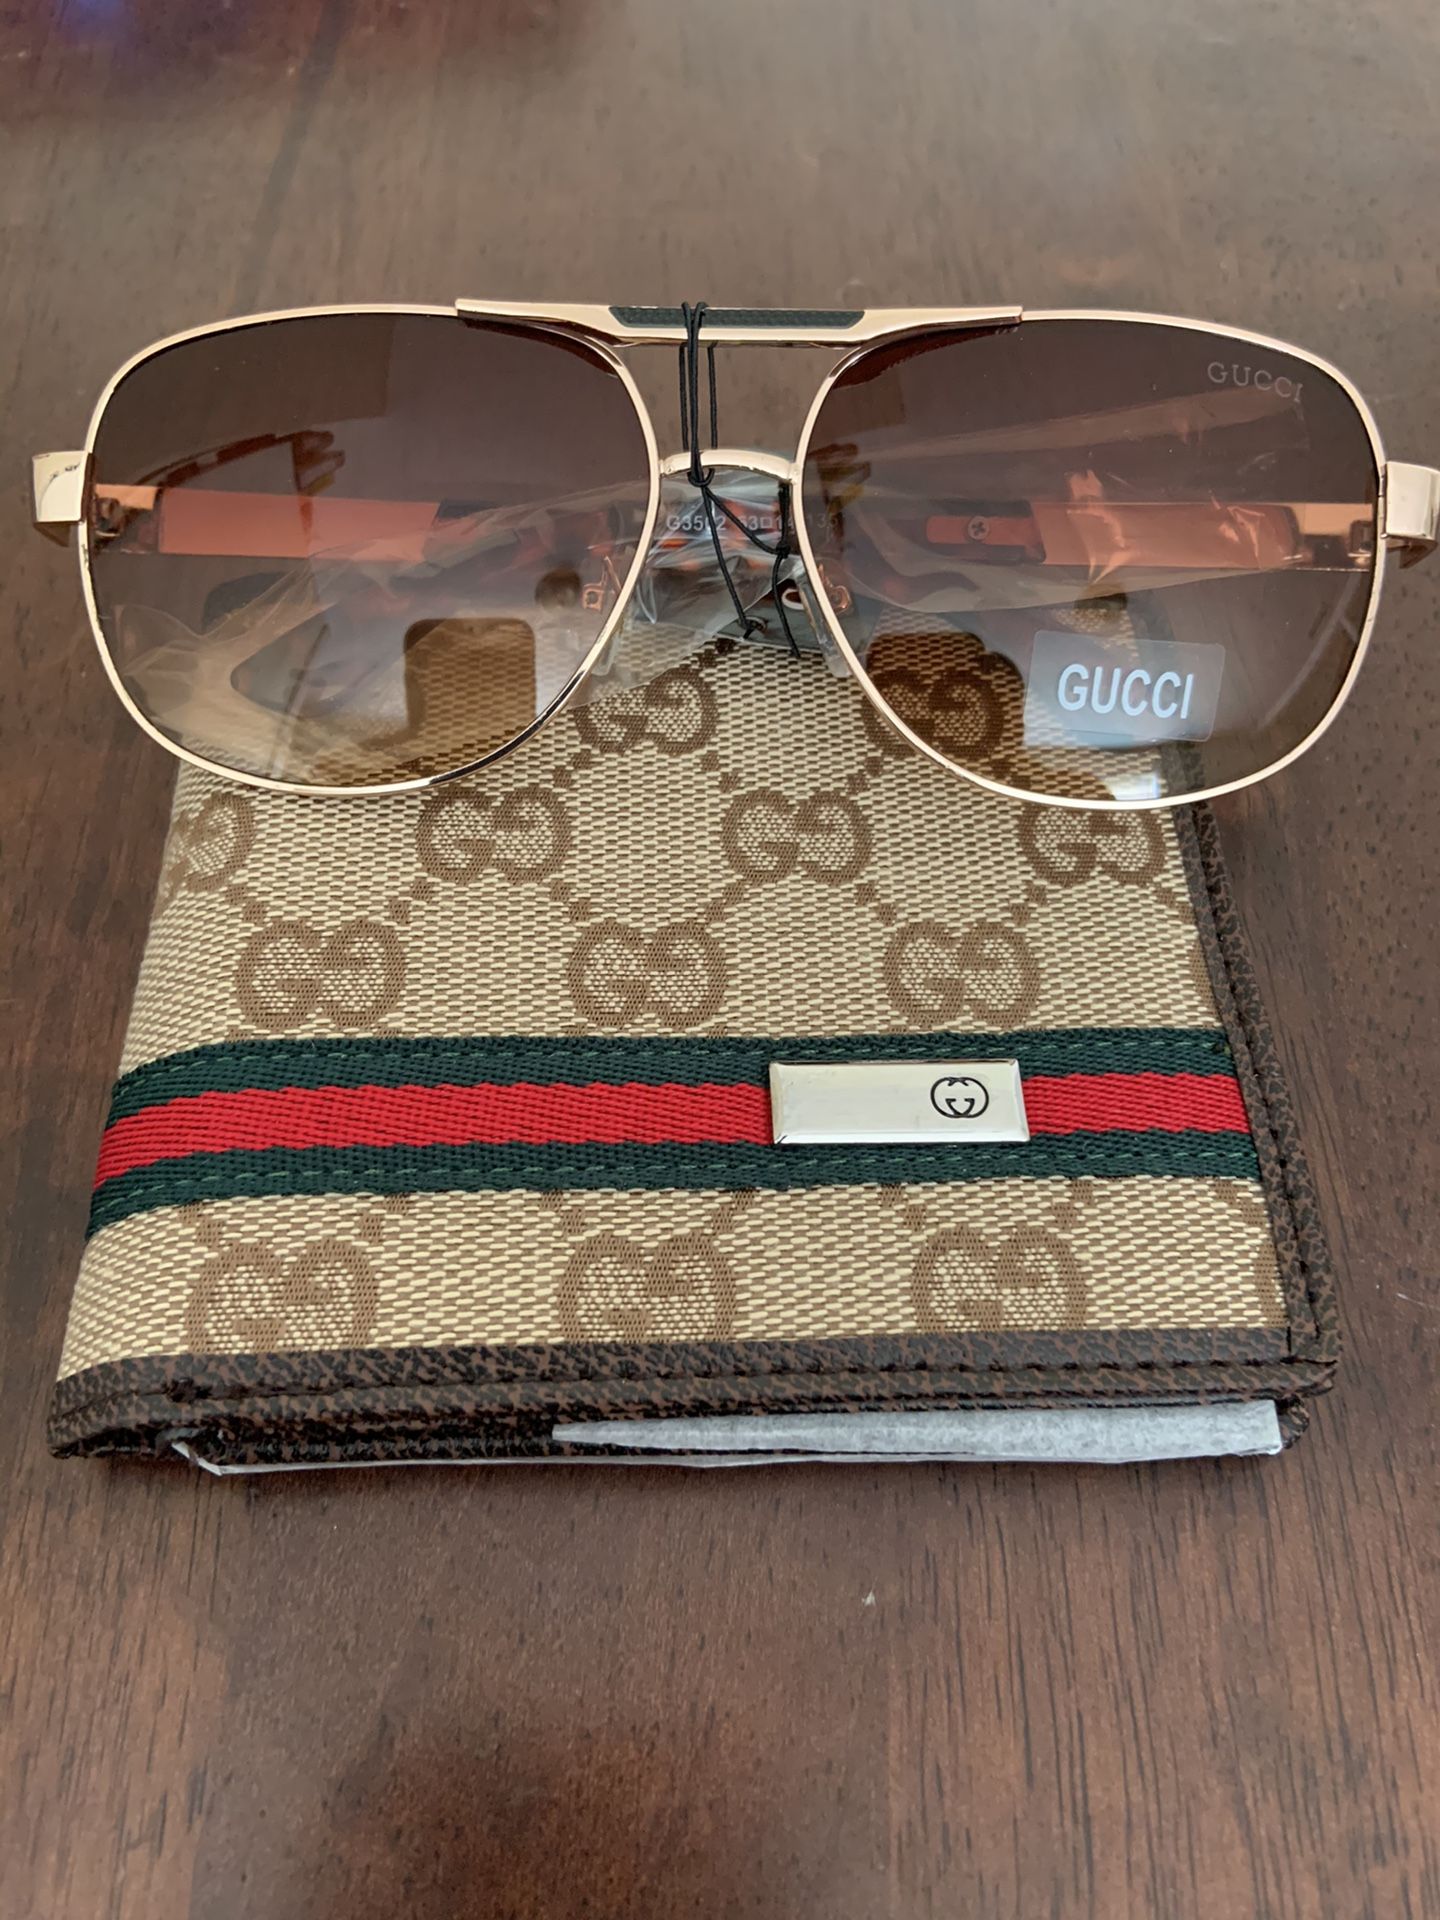 Men’s wallet and sunglasses